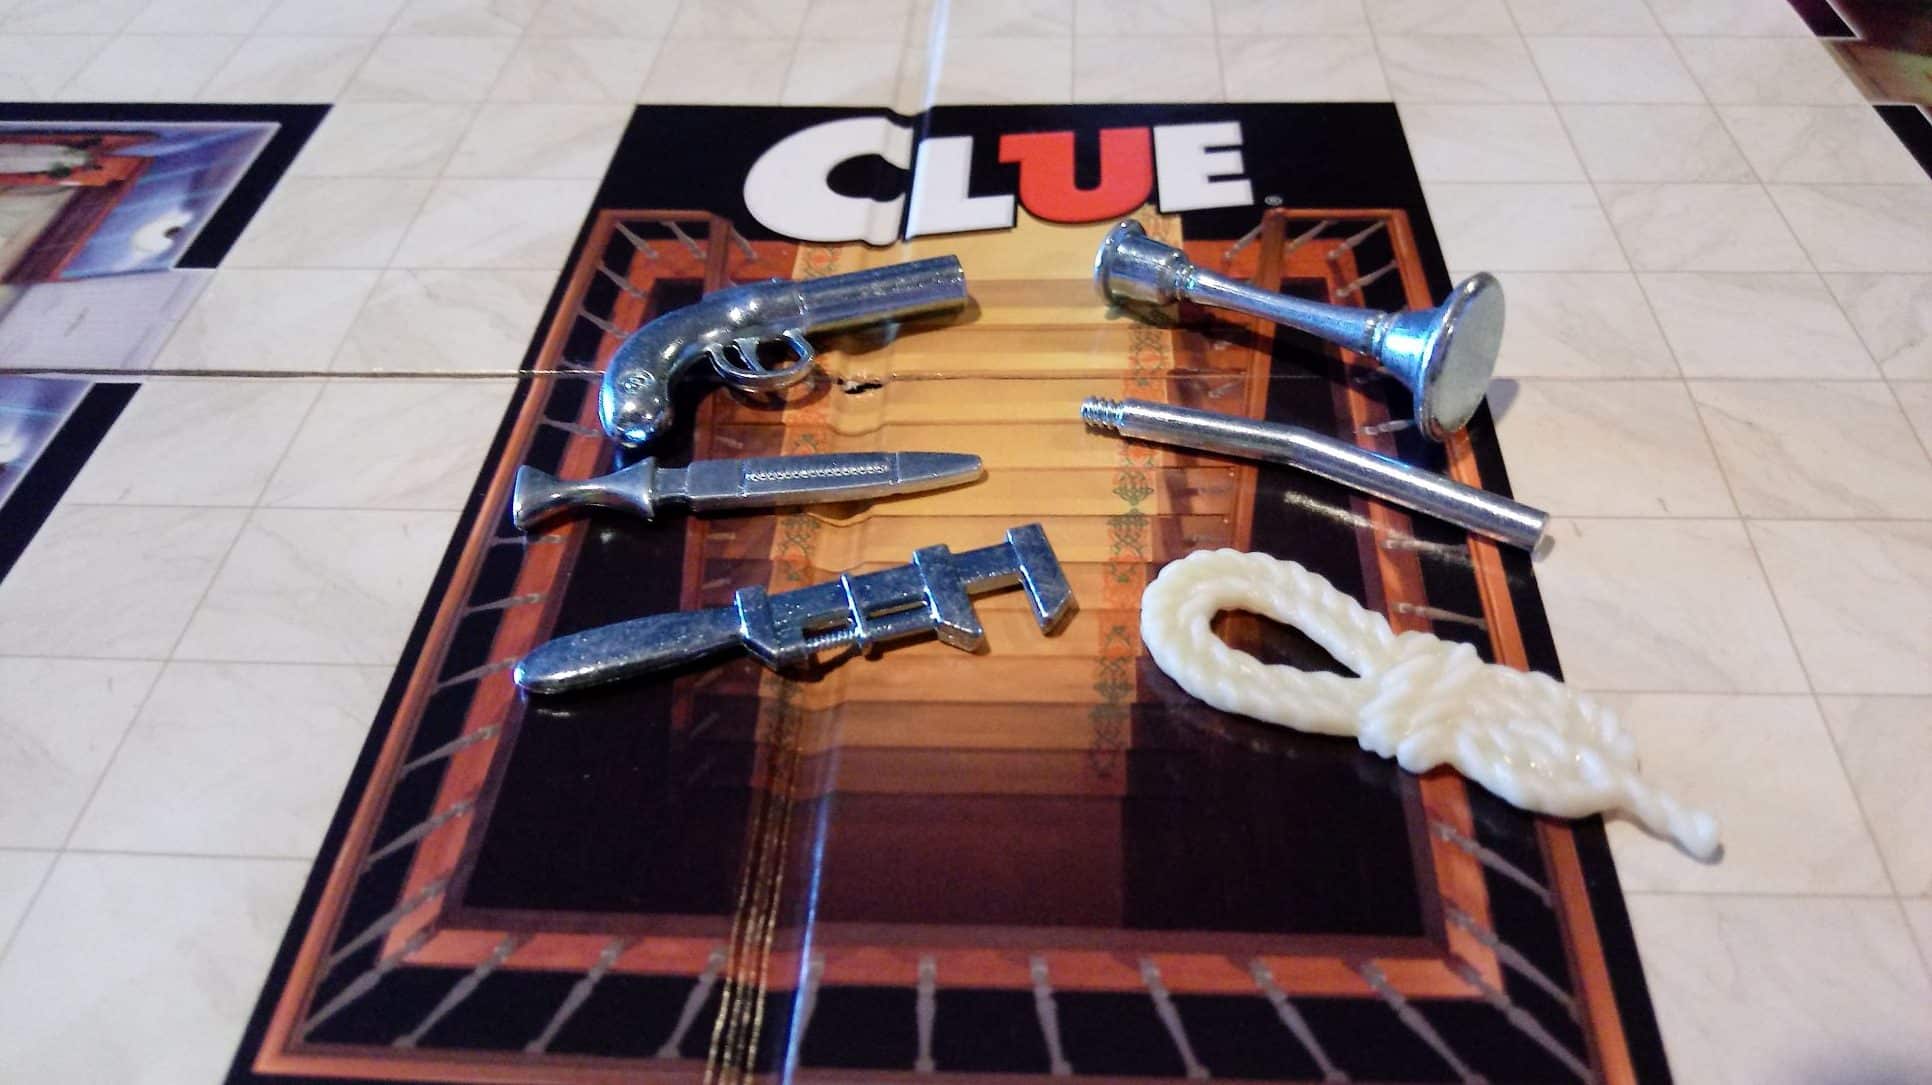 Closeup of the Clue weapon choices on the game board.